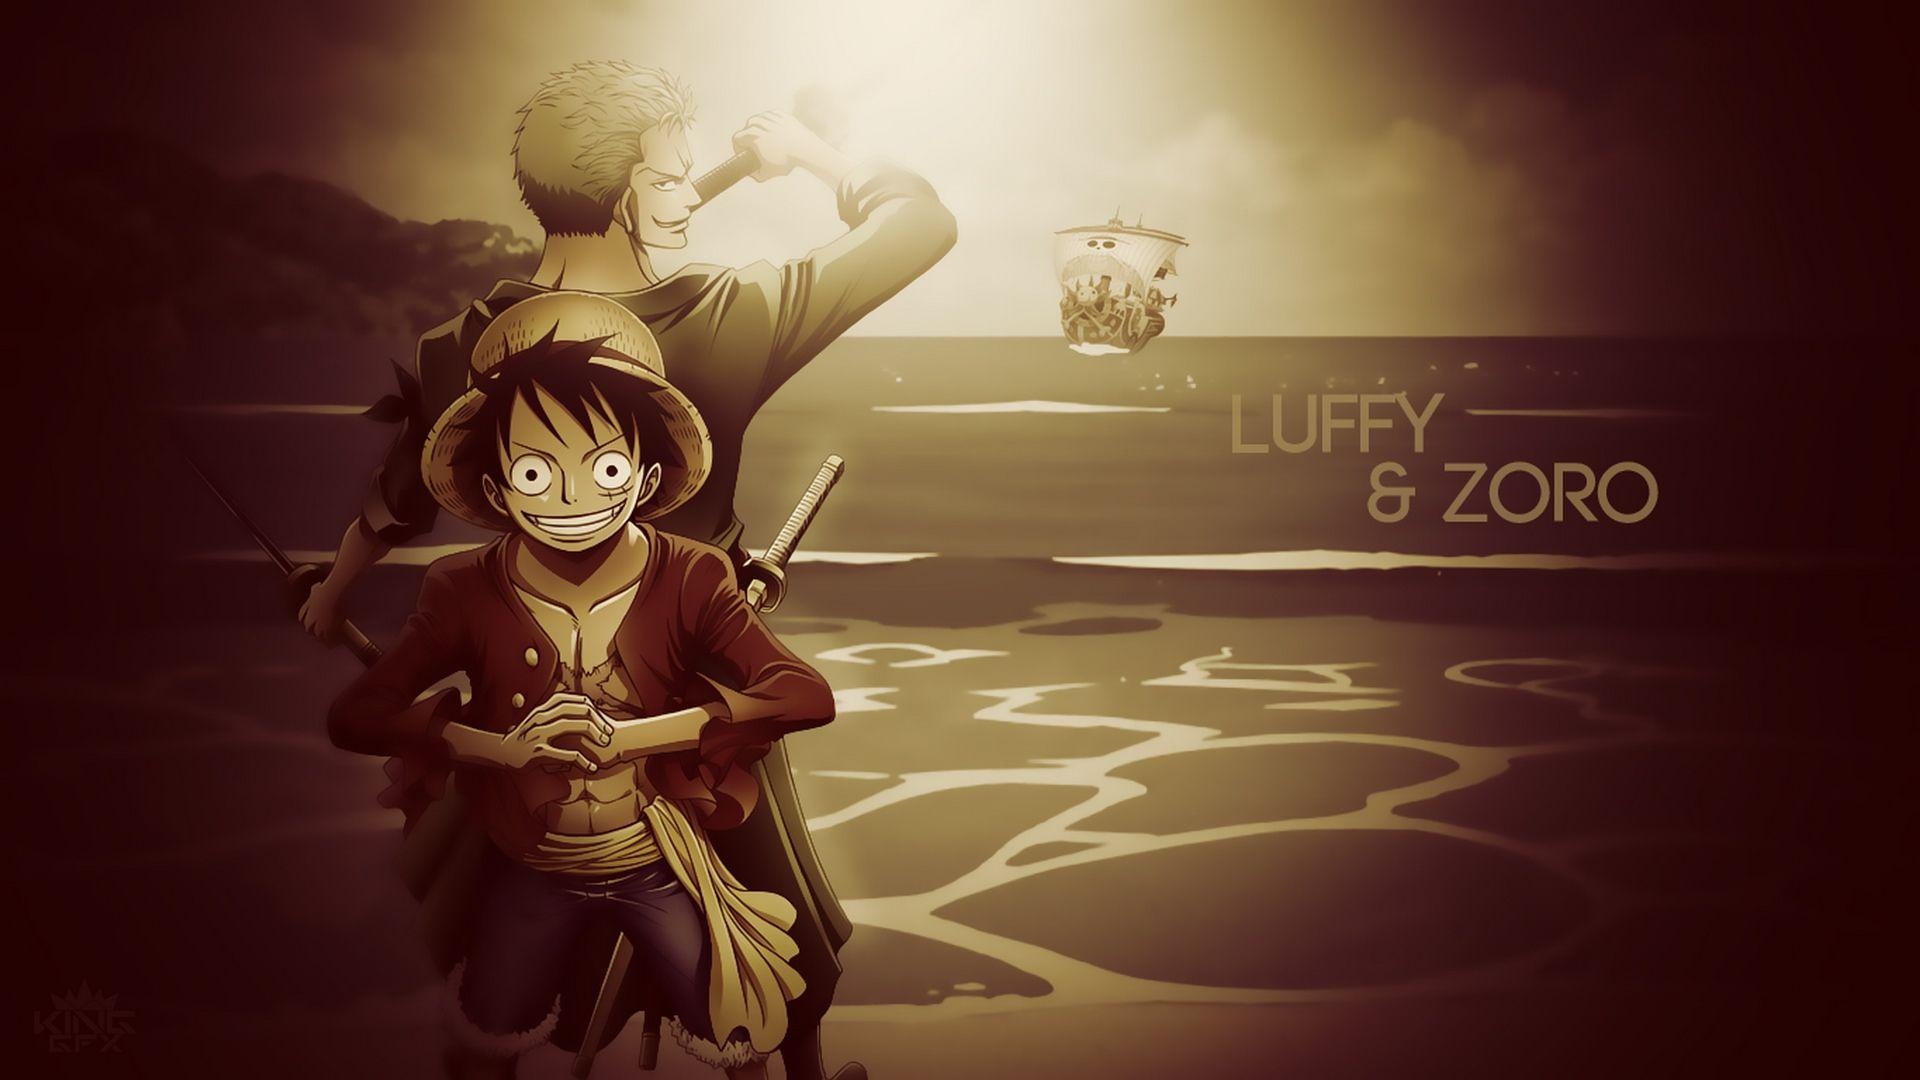 One Piece Luffy and Zoro After 2 Years Wallpaper. Anime